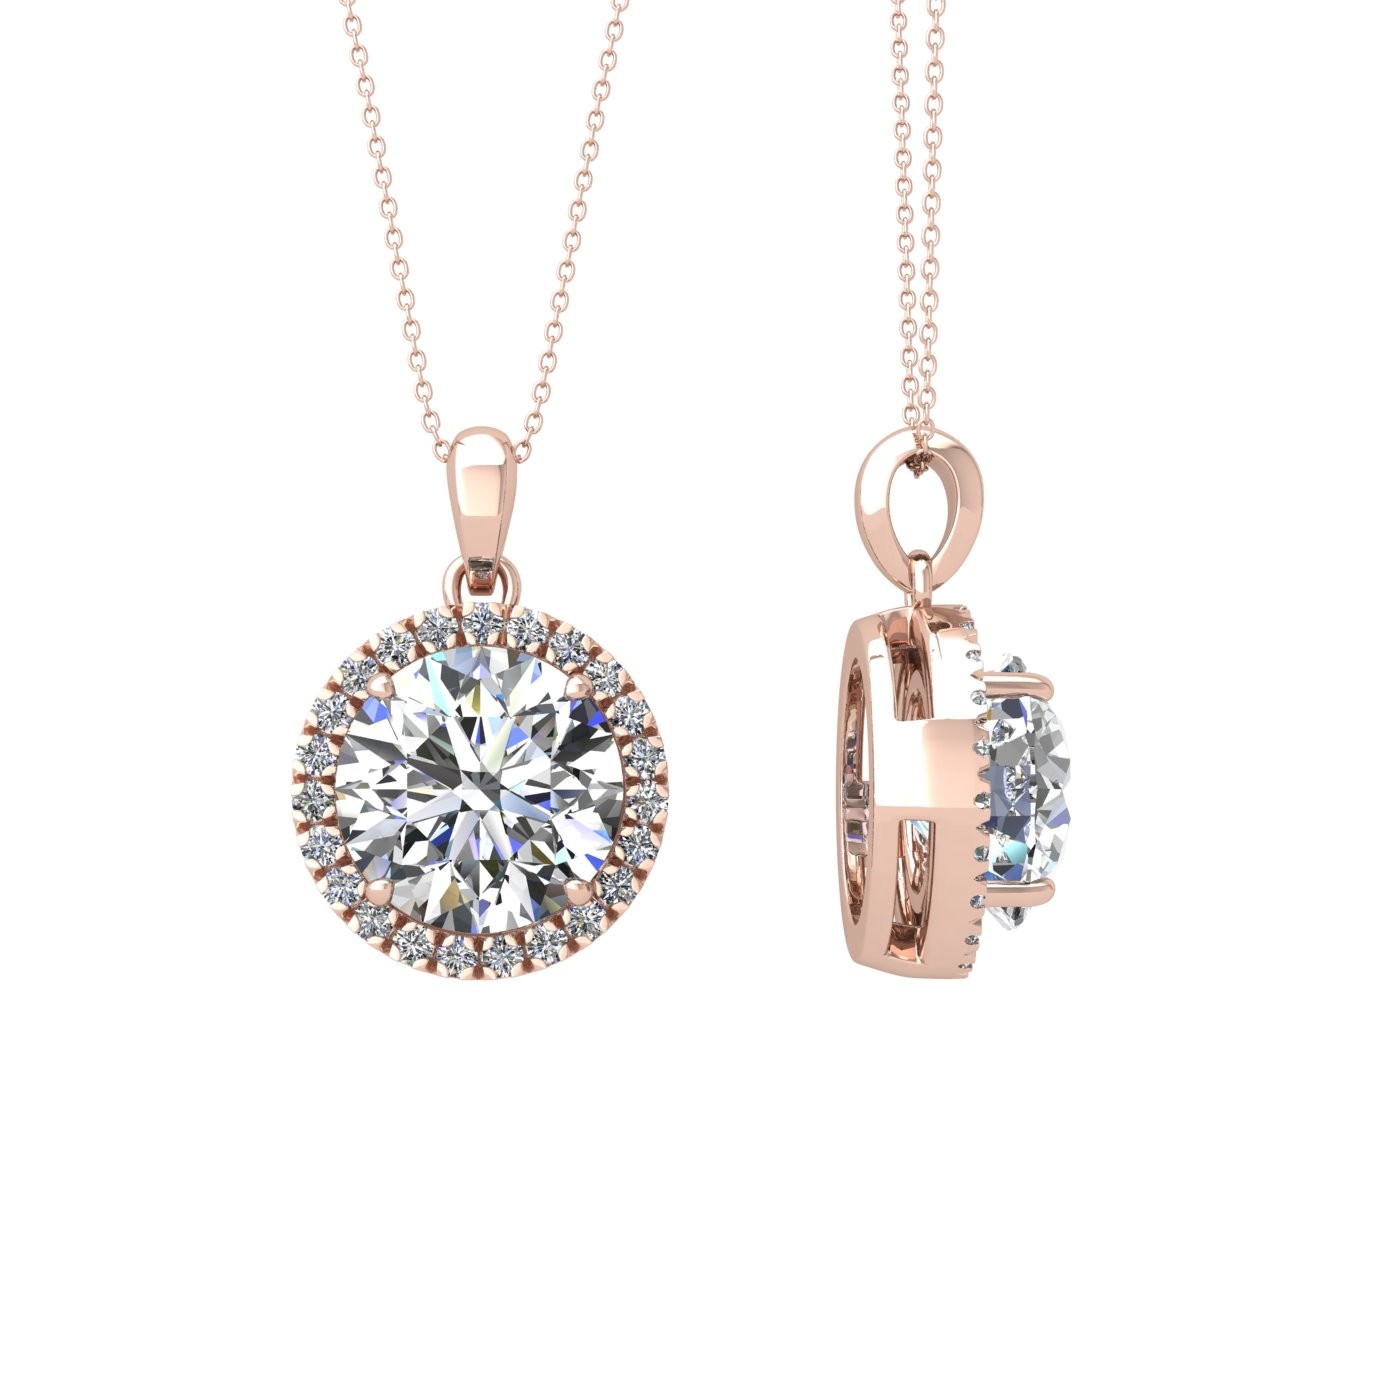 18k yellow gold 1 ct 4 prong round shape diamond pendant with diamond pavÉ set halo including chain seperate from the pendant Photos & images